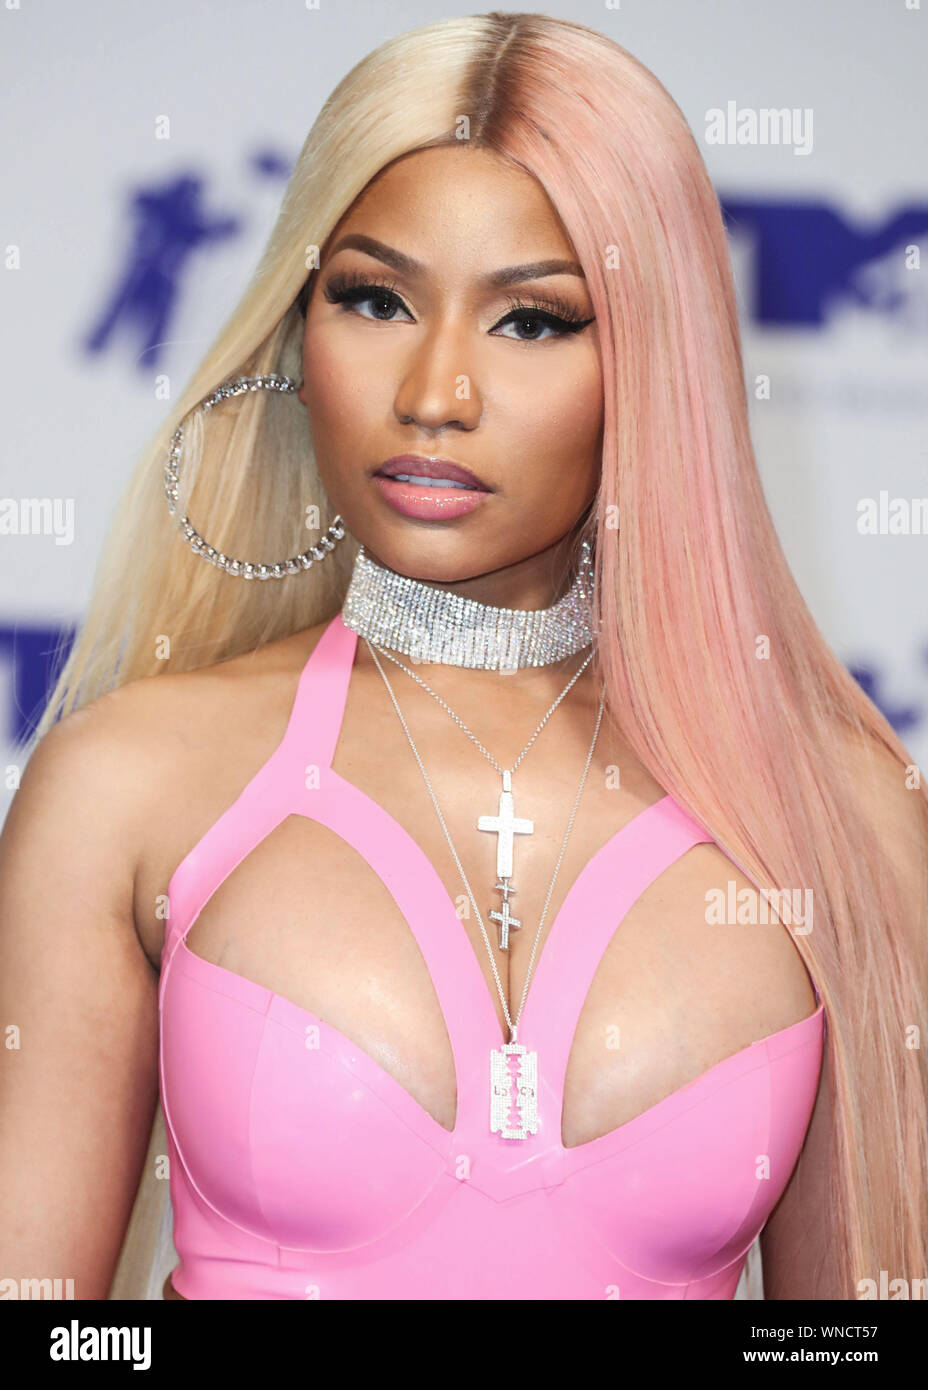 Inglewood, United States. 27th Aug, 2018. (FILE) Nicki Minaj Announces Retirement On Twitter. INGLEWOOD, LOS ANGELES, CA, USA - AUGUST 27: Rapper Nicki Minaj wearing a pink Vex Latex bodysuit arrives at the 2017 MTV Video Music Awards held at The Forum on August 27, 2017 in Inglewood, Los Angeles, California, United States. (Photo by Xavier Collin/Image Press Agency) Credit: Image Press Agency/Alamy Live News Stock Photo